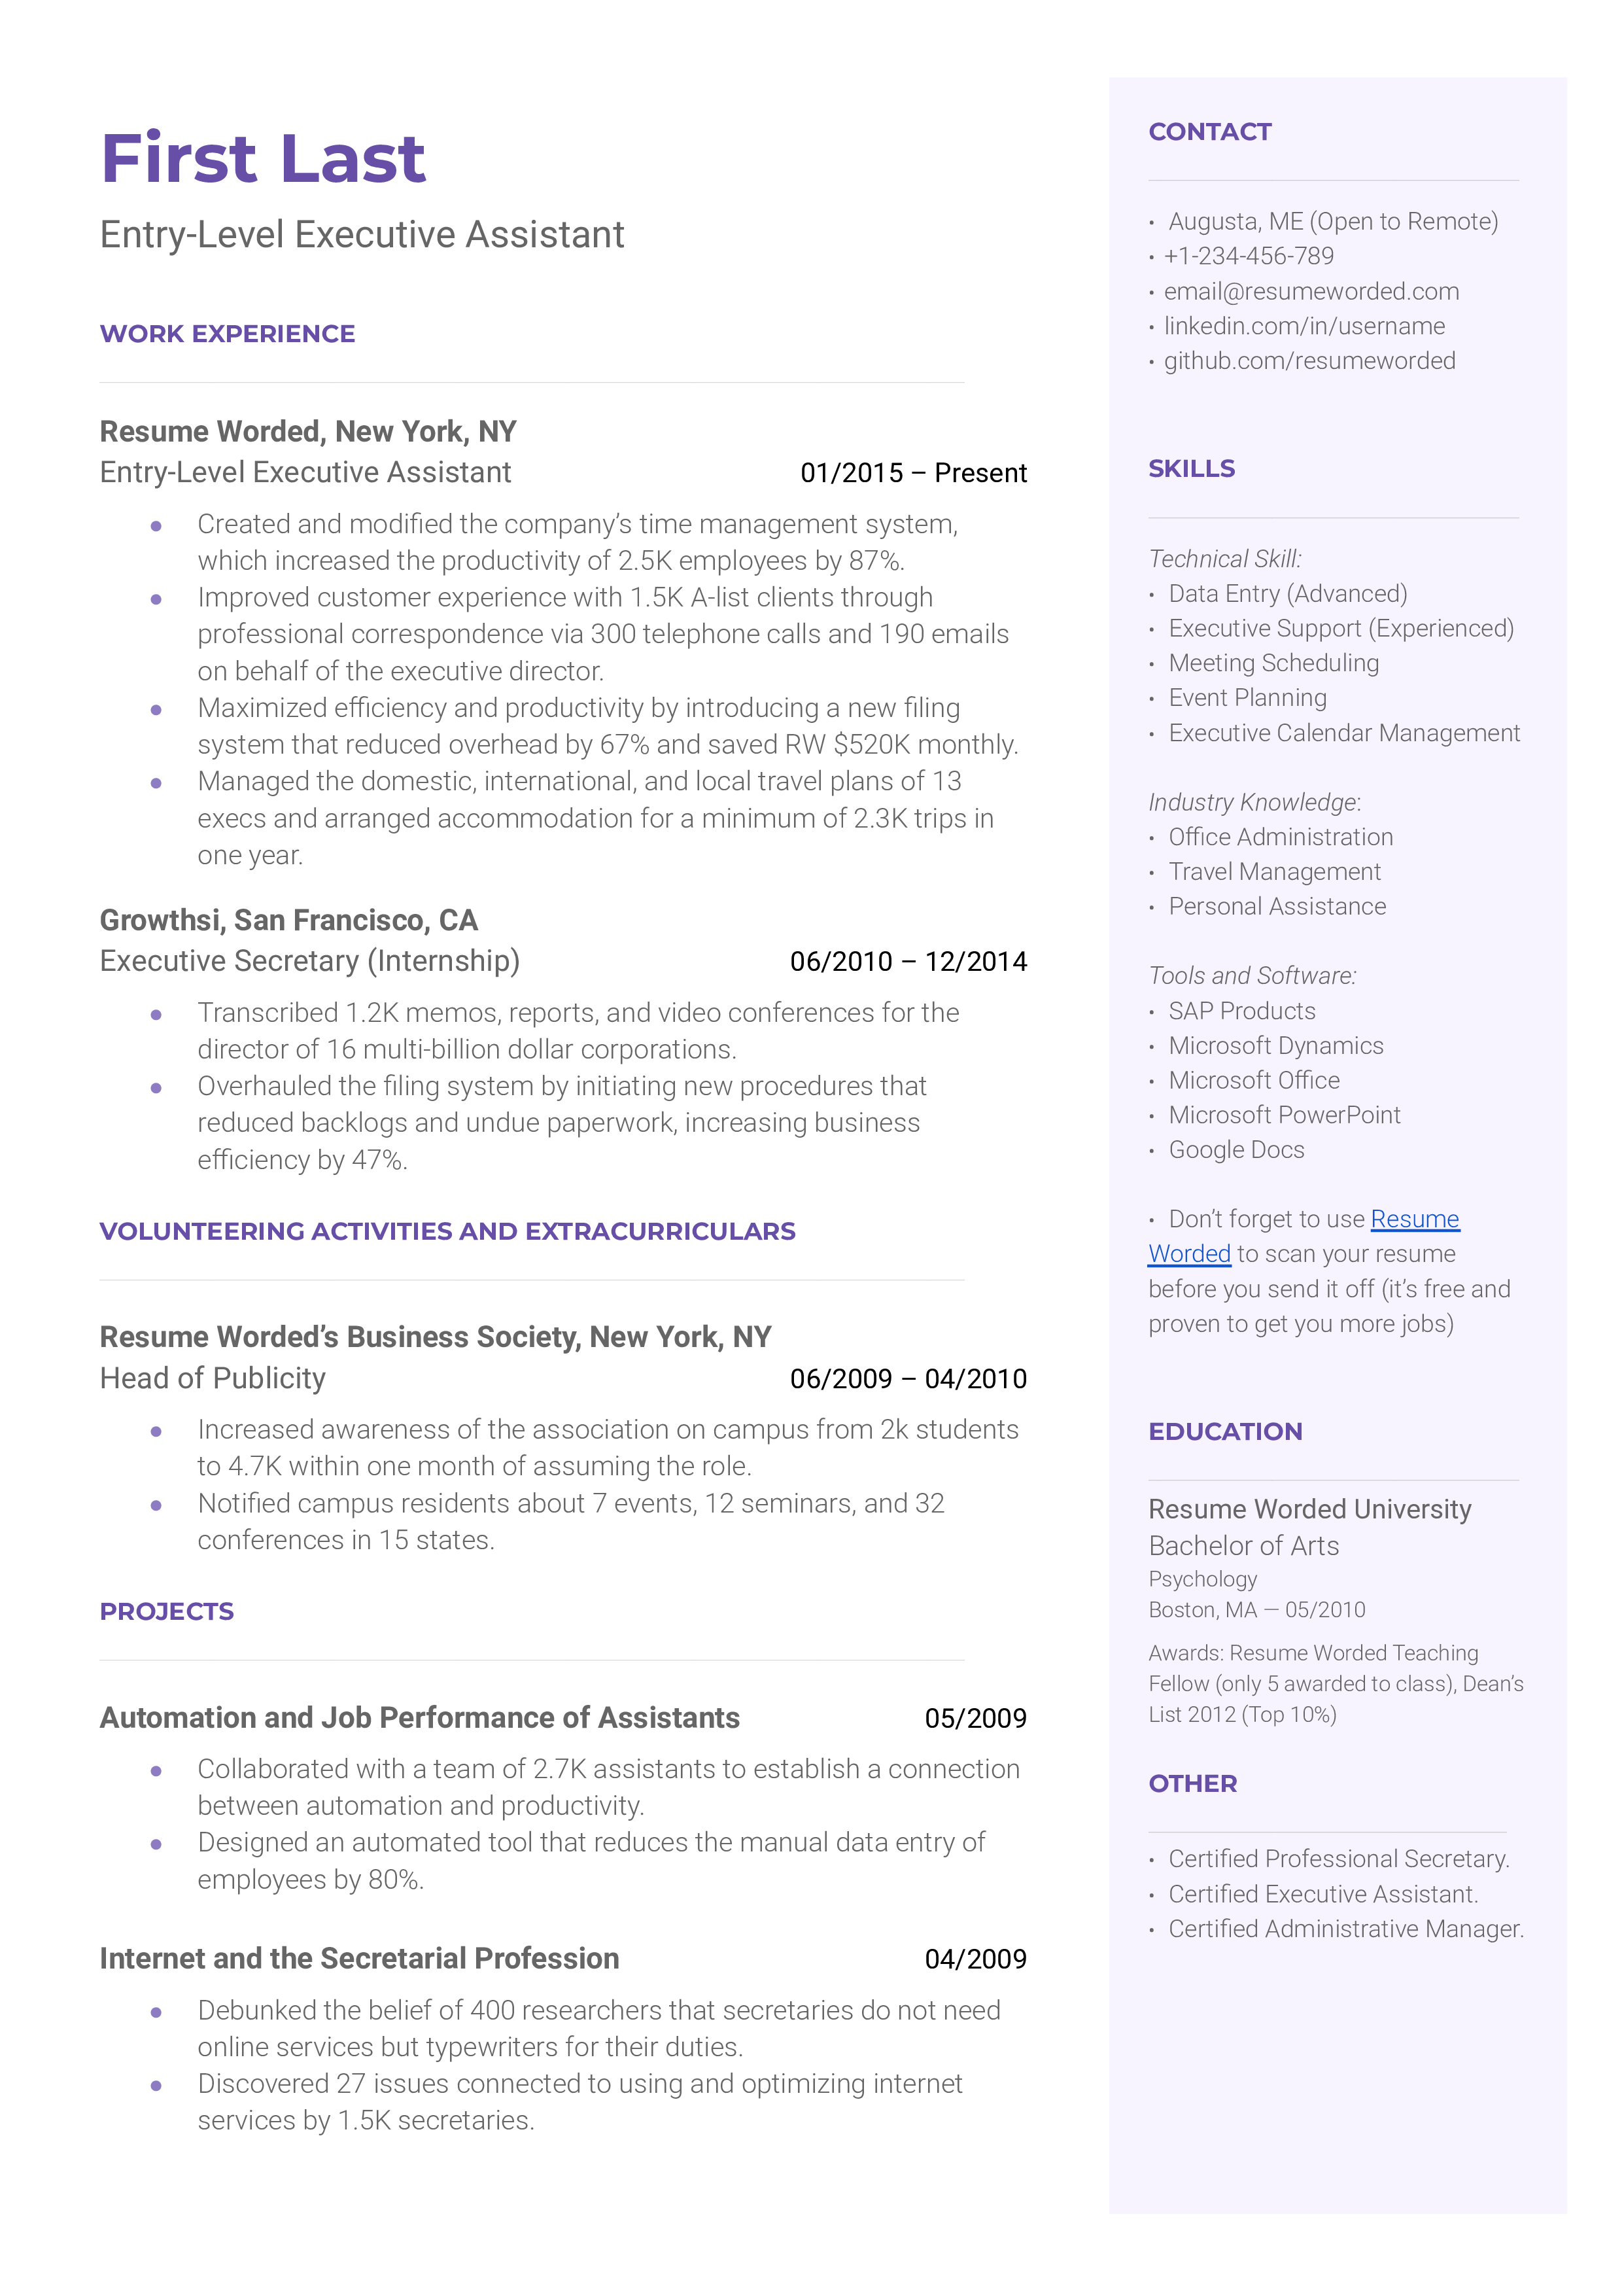 Entry-Level Executive Assistant Resume Sample